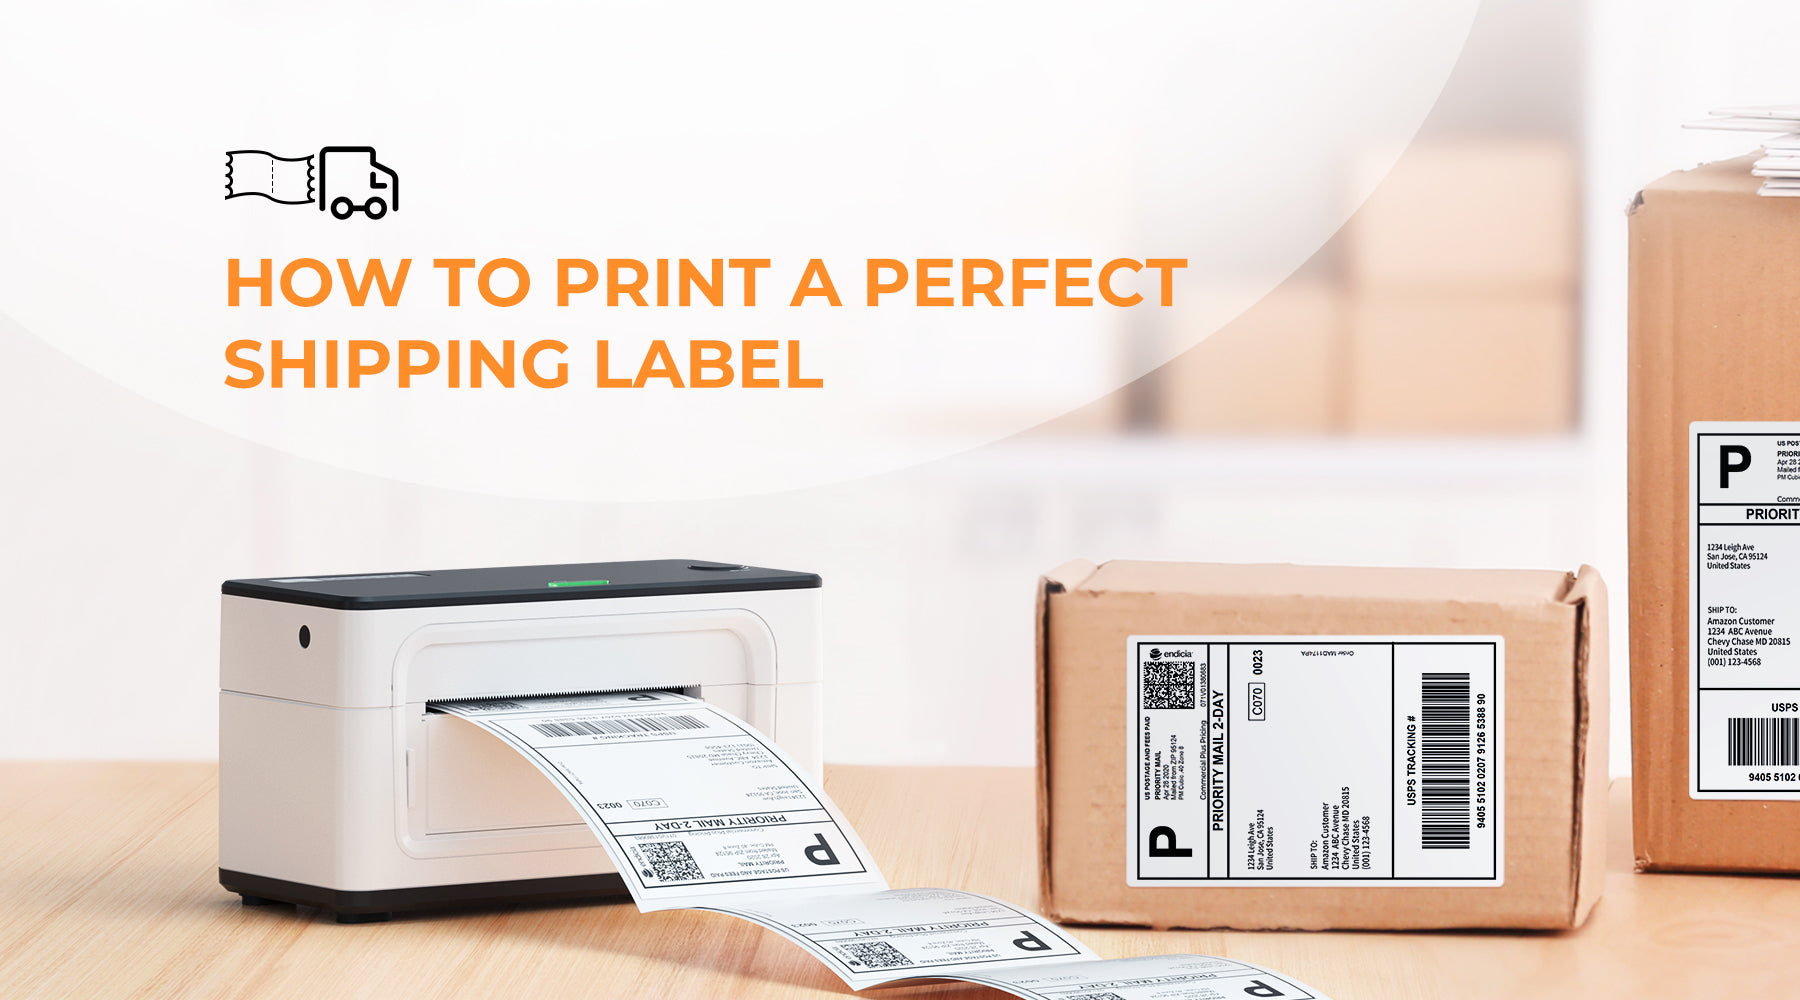 How to Print a Perfect Shipping Label?